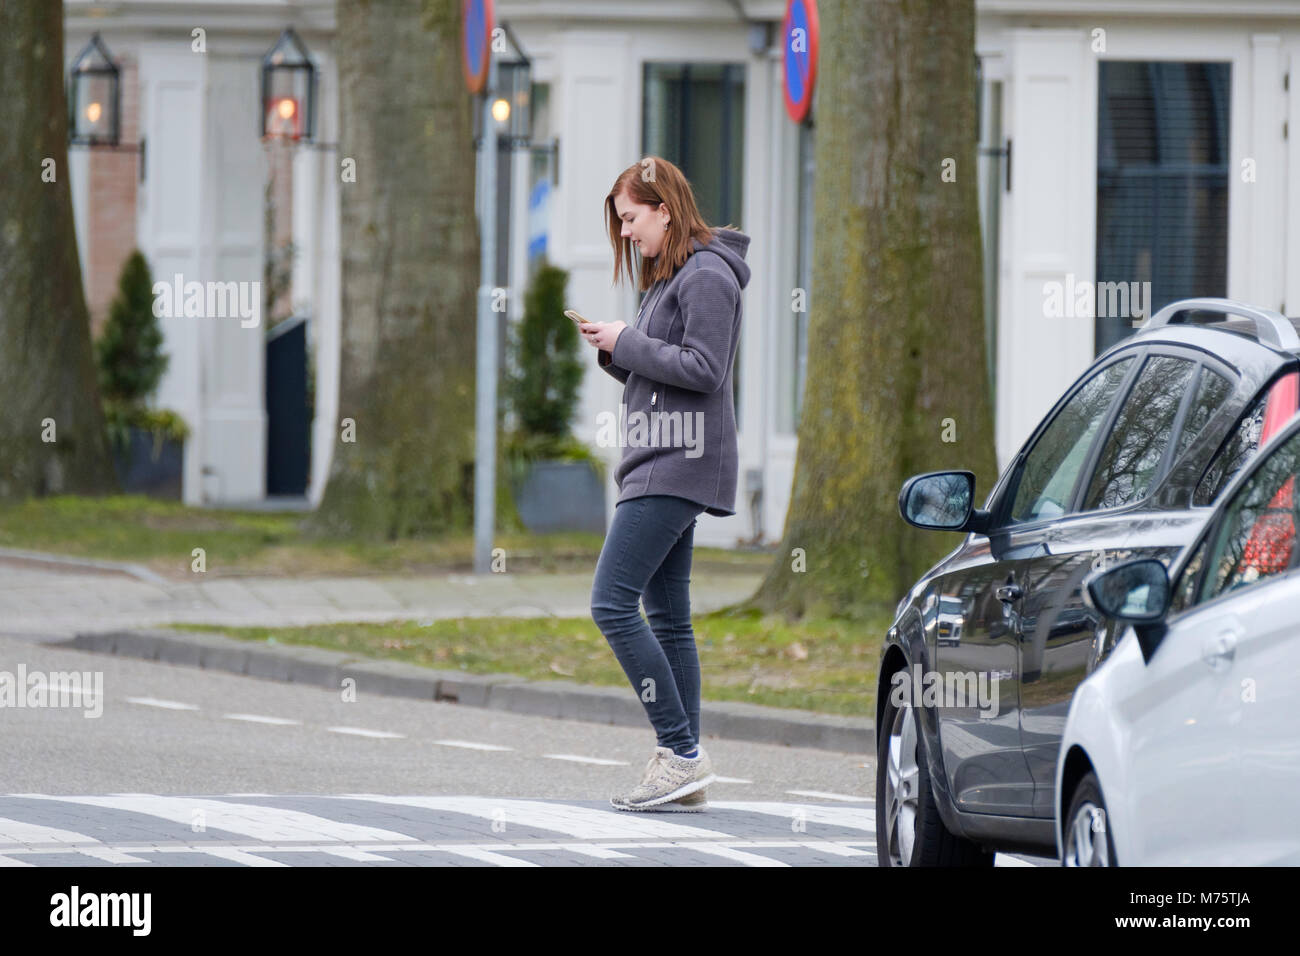 young woman walks on the crosswalk and checks her smartphone for messages and does not pay any attention to traffic. Stock Photo